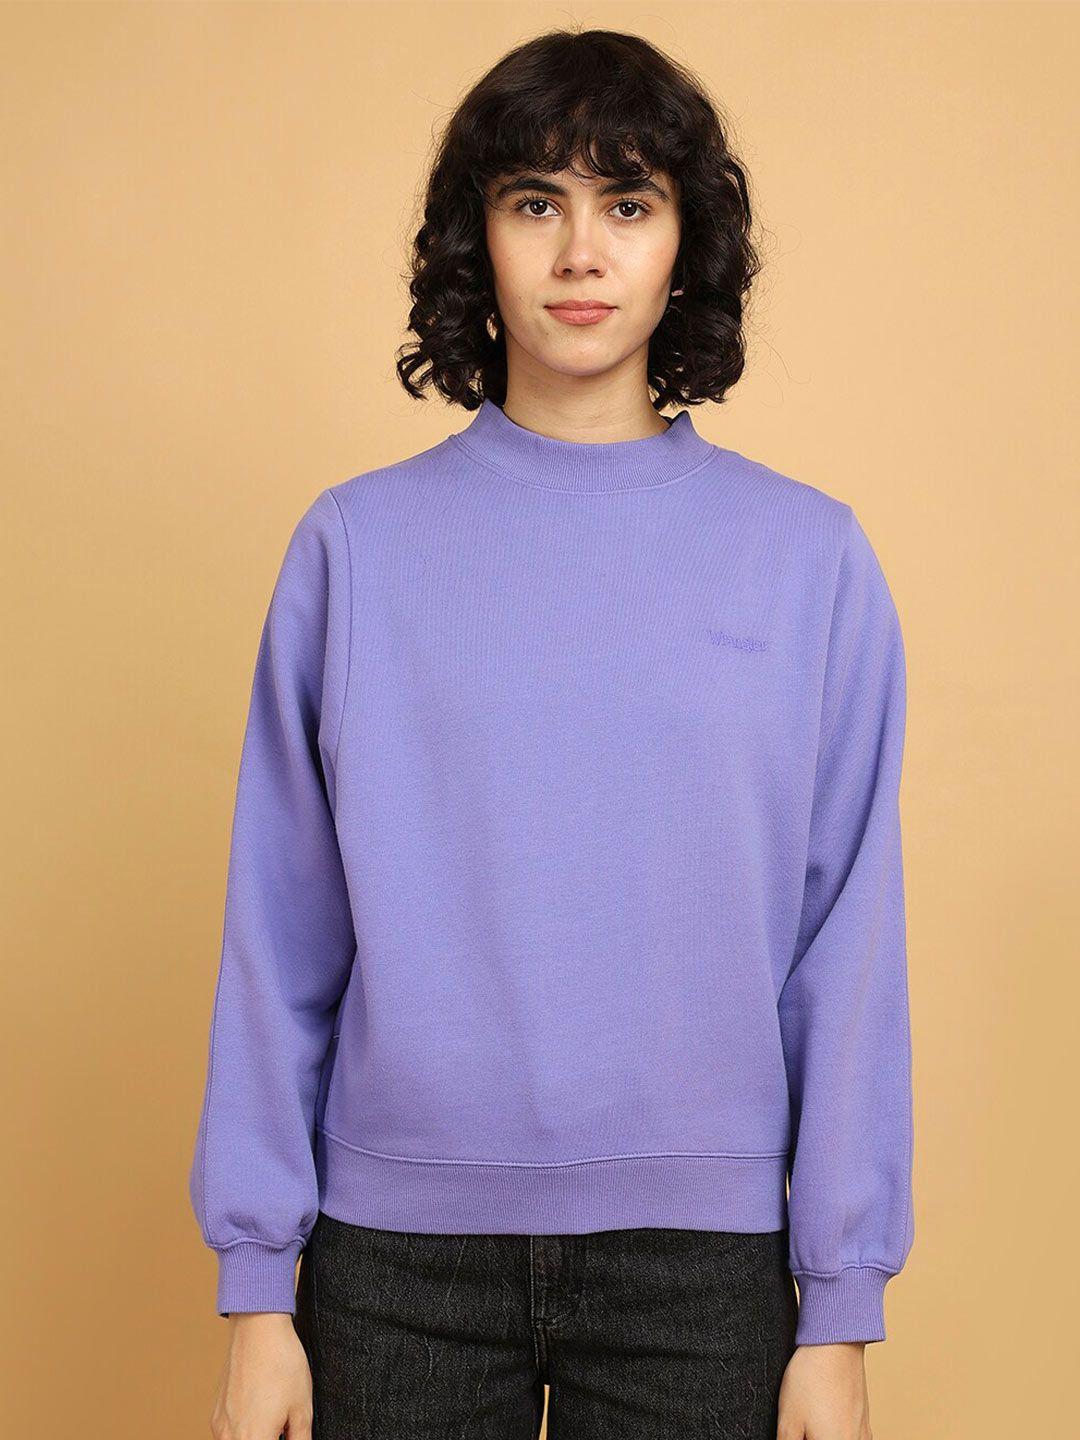 wrangler round neck relaxed fit sweatshirt